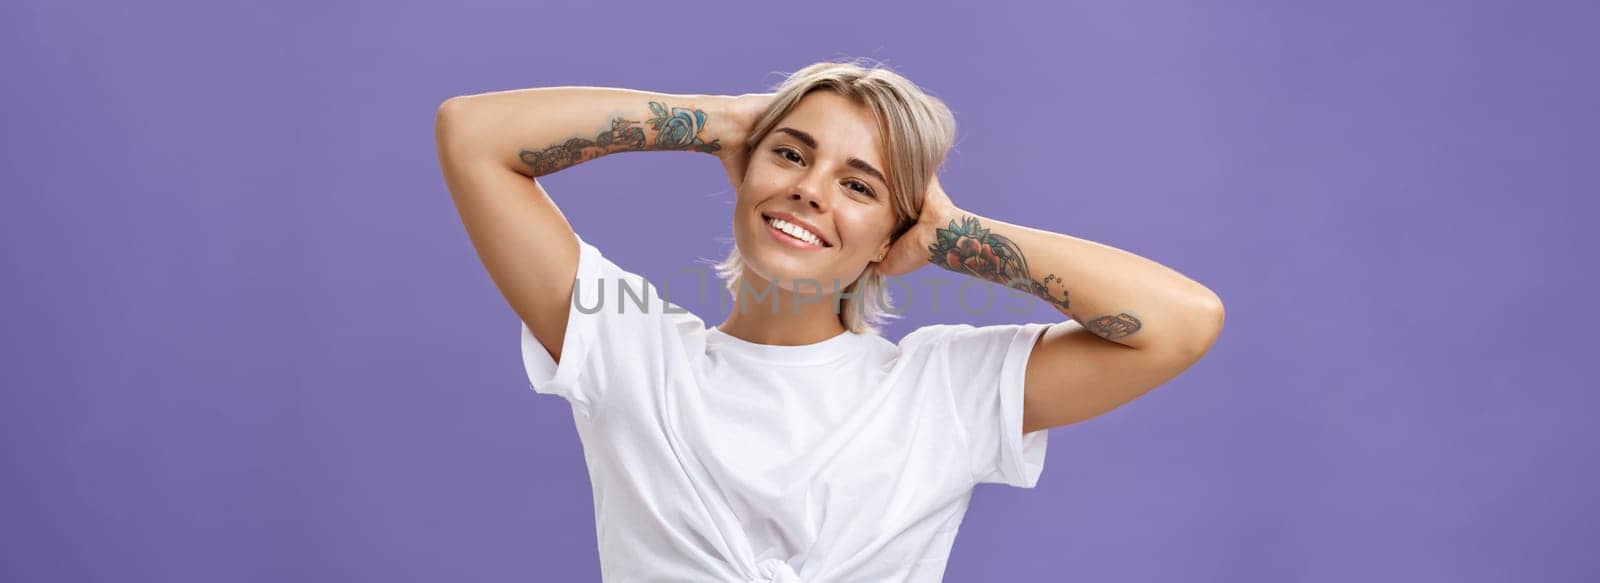 Lifestyle. Close-up shot of good-looking stylish and relaxed blond woman with tattoos on arms holding hands behind head smiling with carefree pleased look enjoying weekends over purple background.